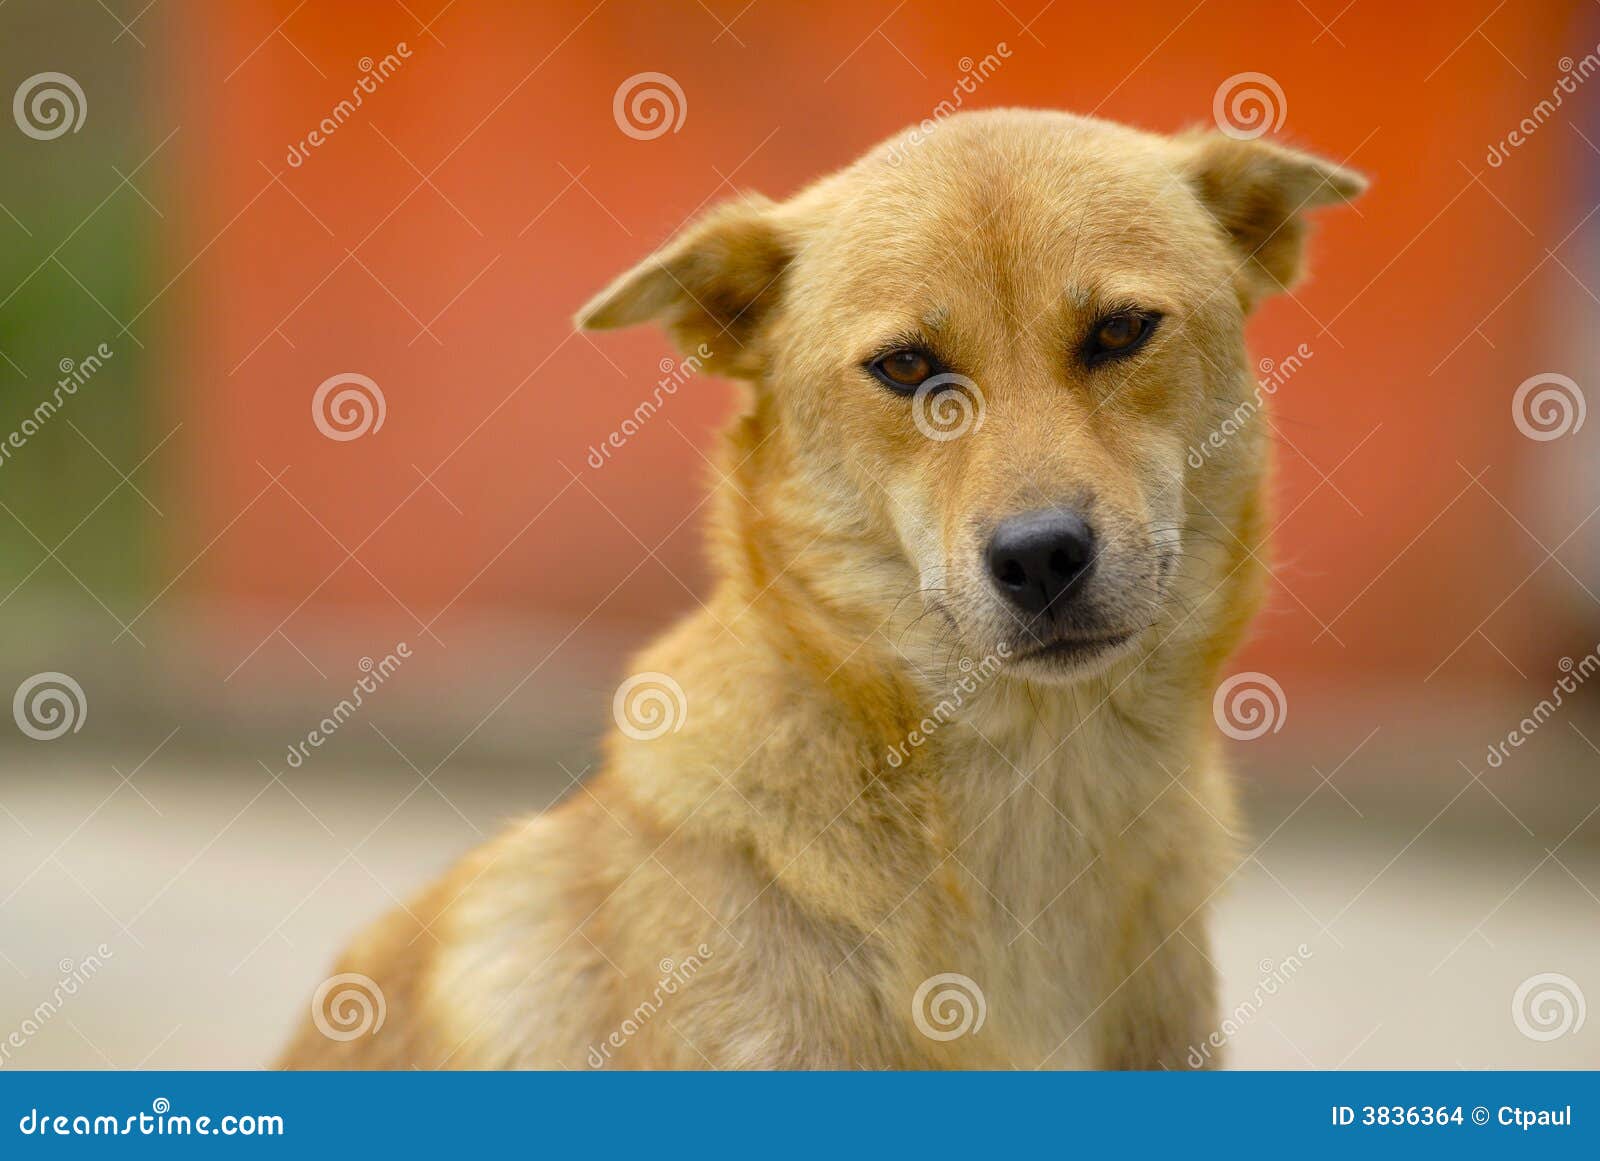 Yellow dog stock photo. Image of full, doggy, pure, cute - 3836364